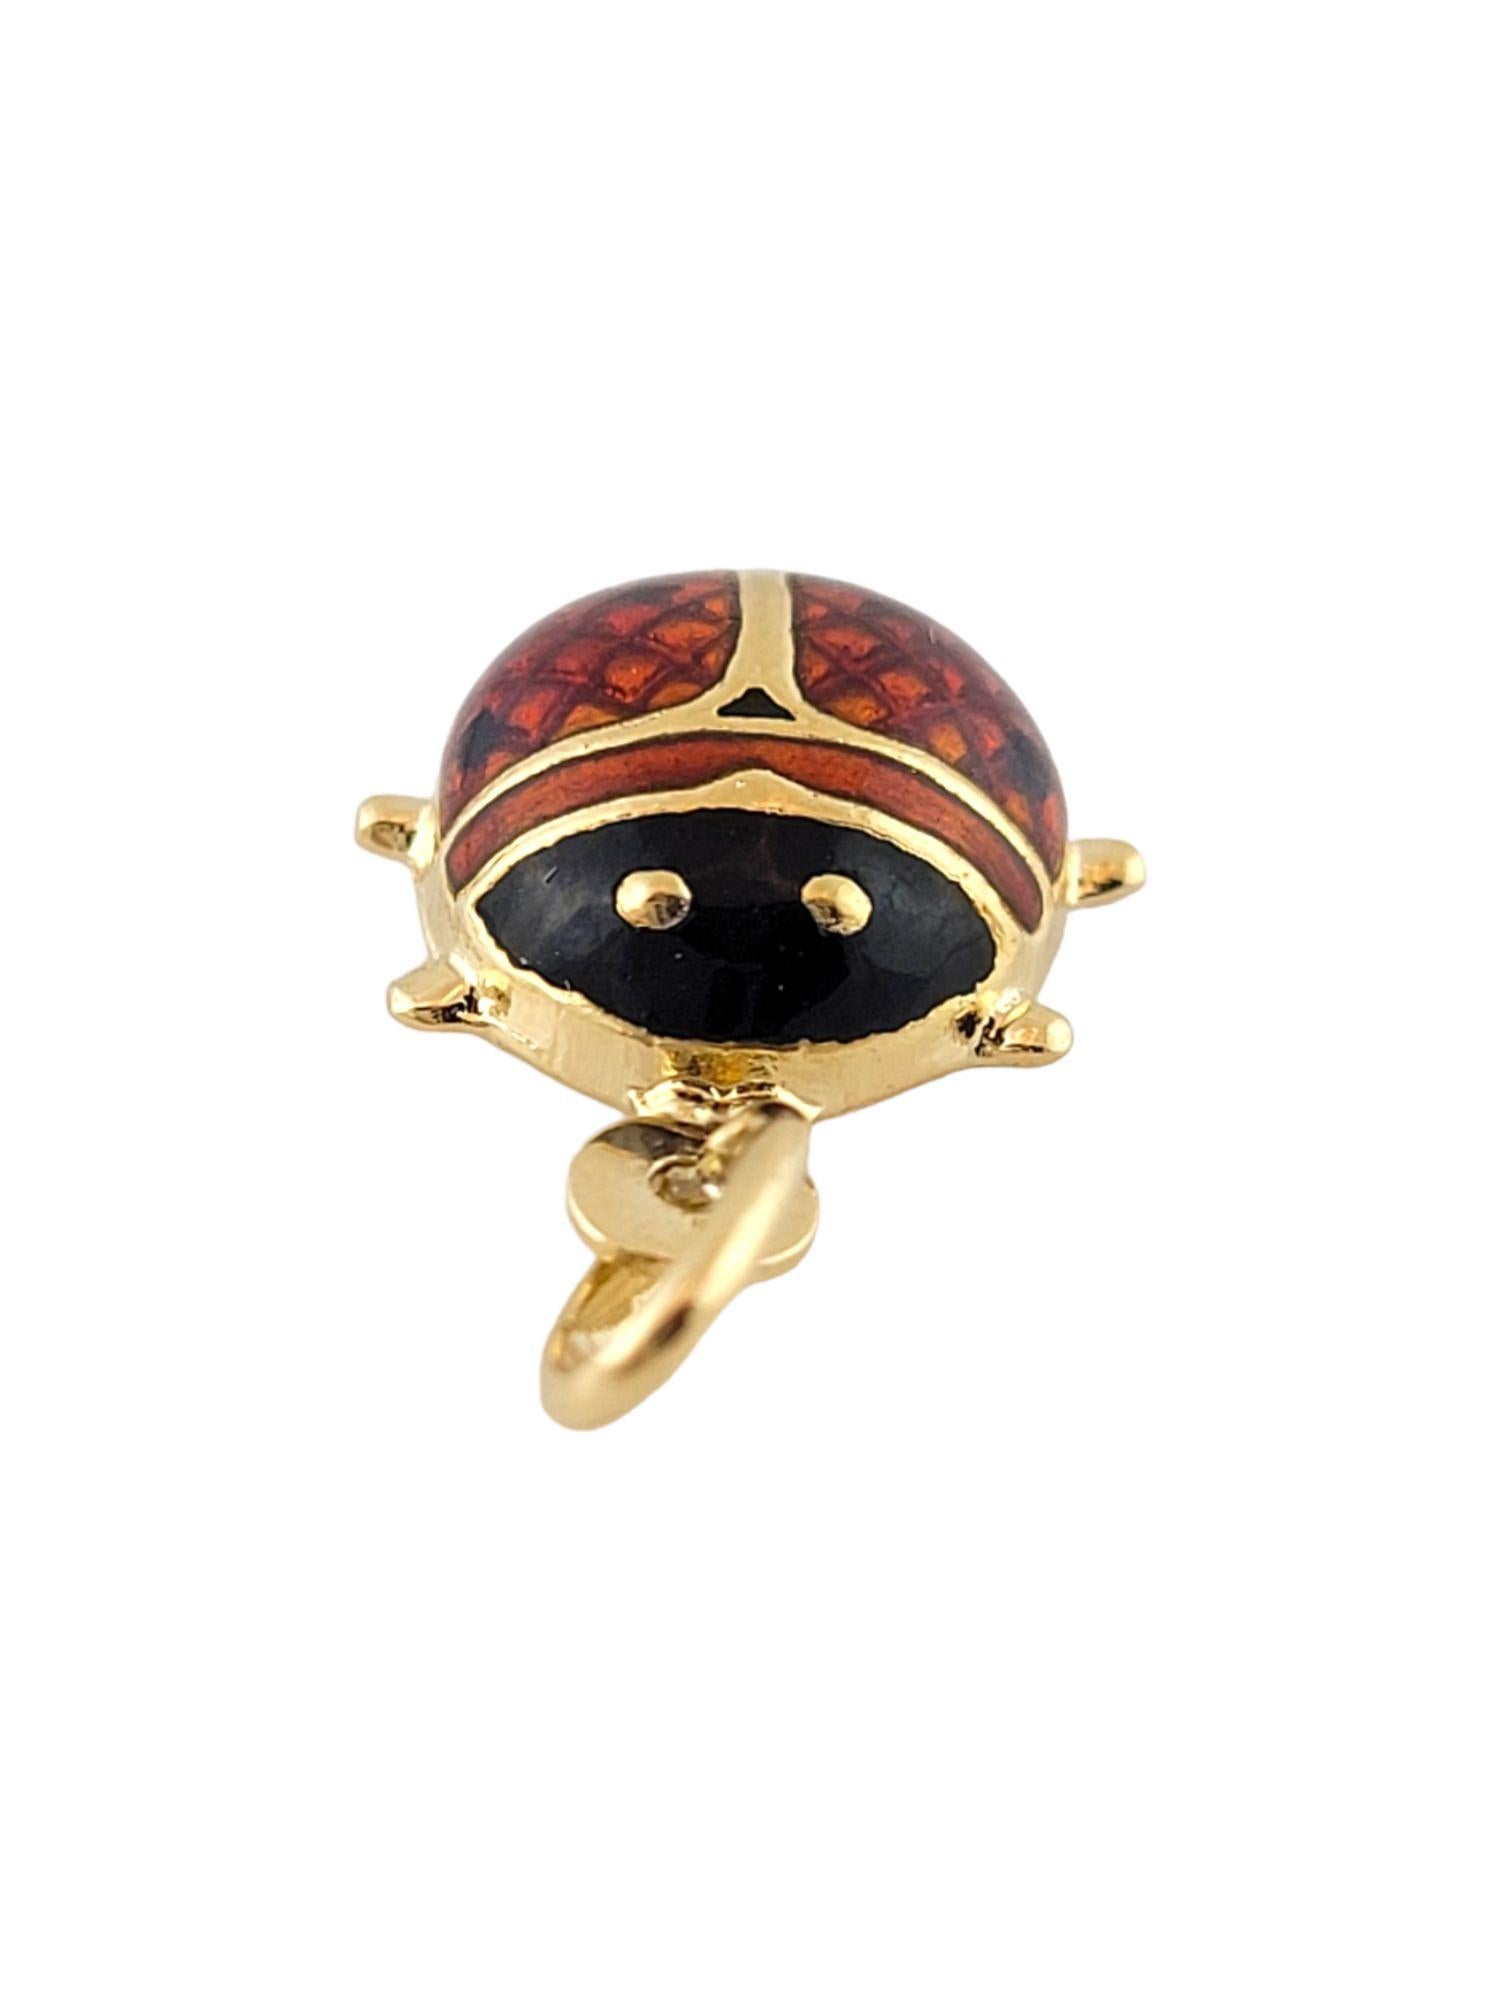 Vintage 18K Yellow Gold Enamel Ladybug Charm

Adorable 18K yellow gold lady bug charm with beautiful red and black enamel!

Size: 17mm X 13mm X 5.5mm
Length w/ bail: 22.5mm

Weight: 1.6 g/ 1.0 dwt

Hallmark: 750

Very good condition, professionally